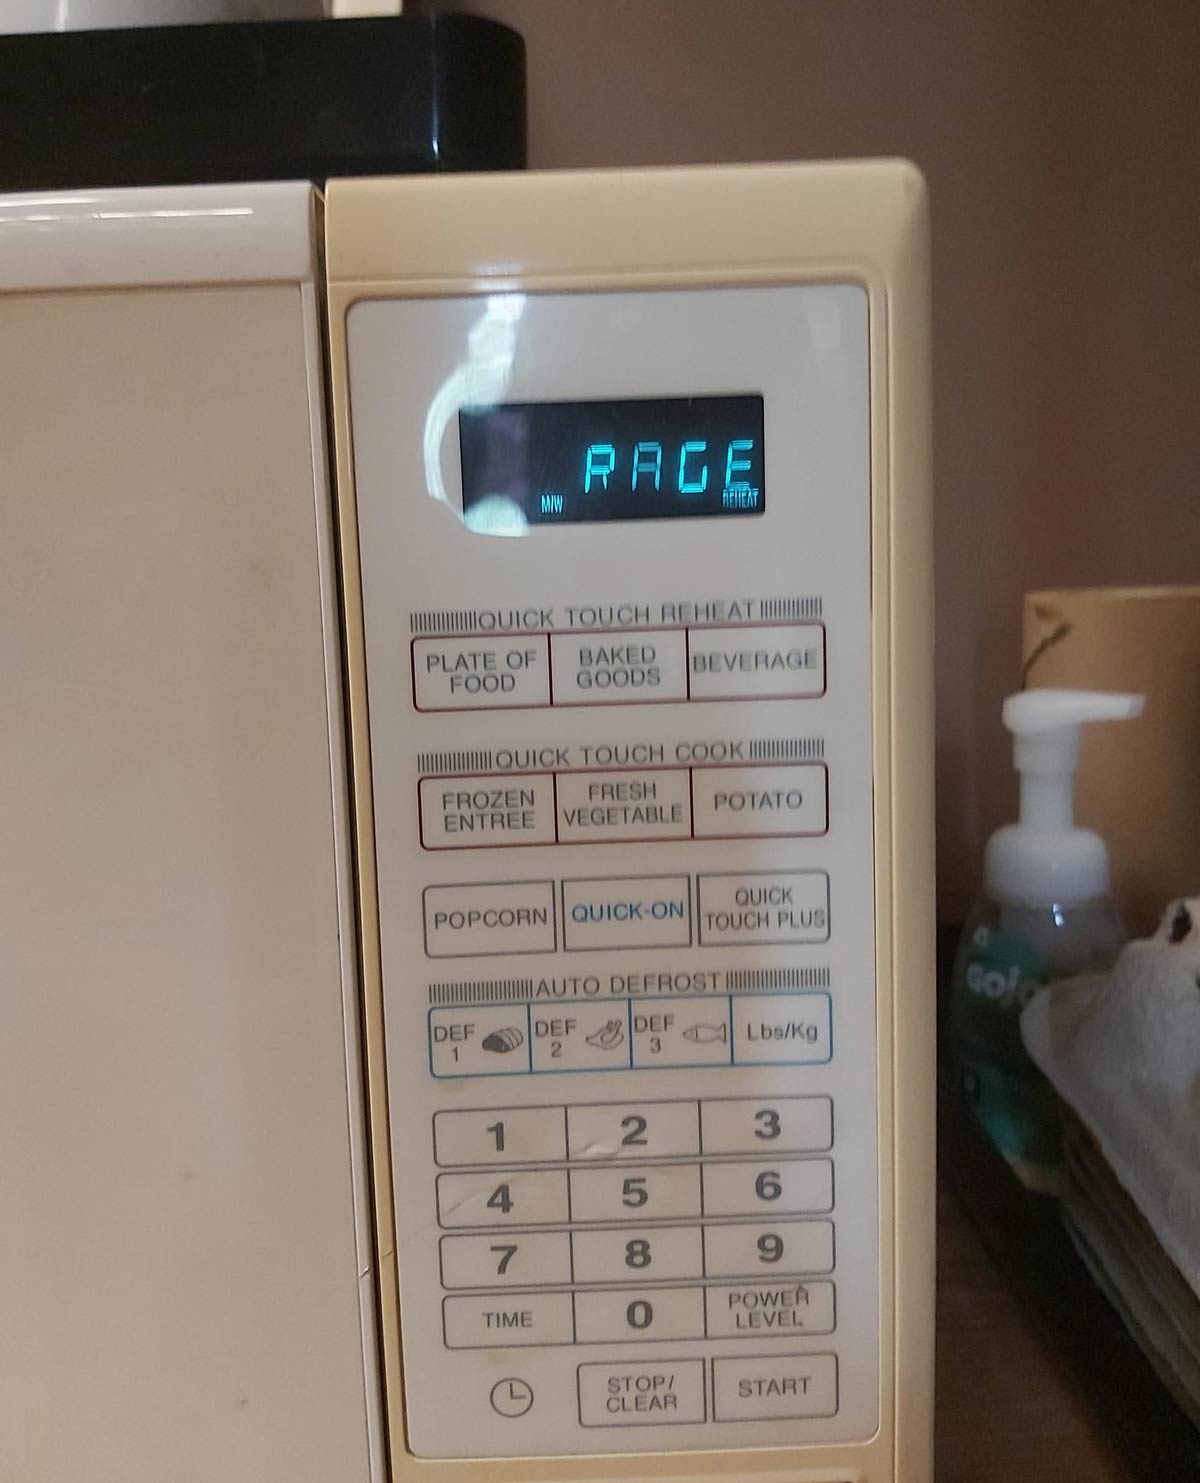 I think I'll avoid the office microwave today...